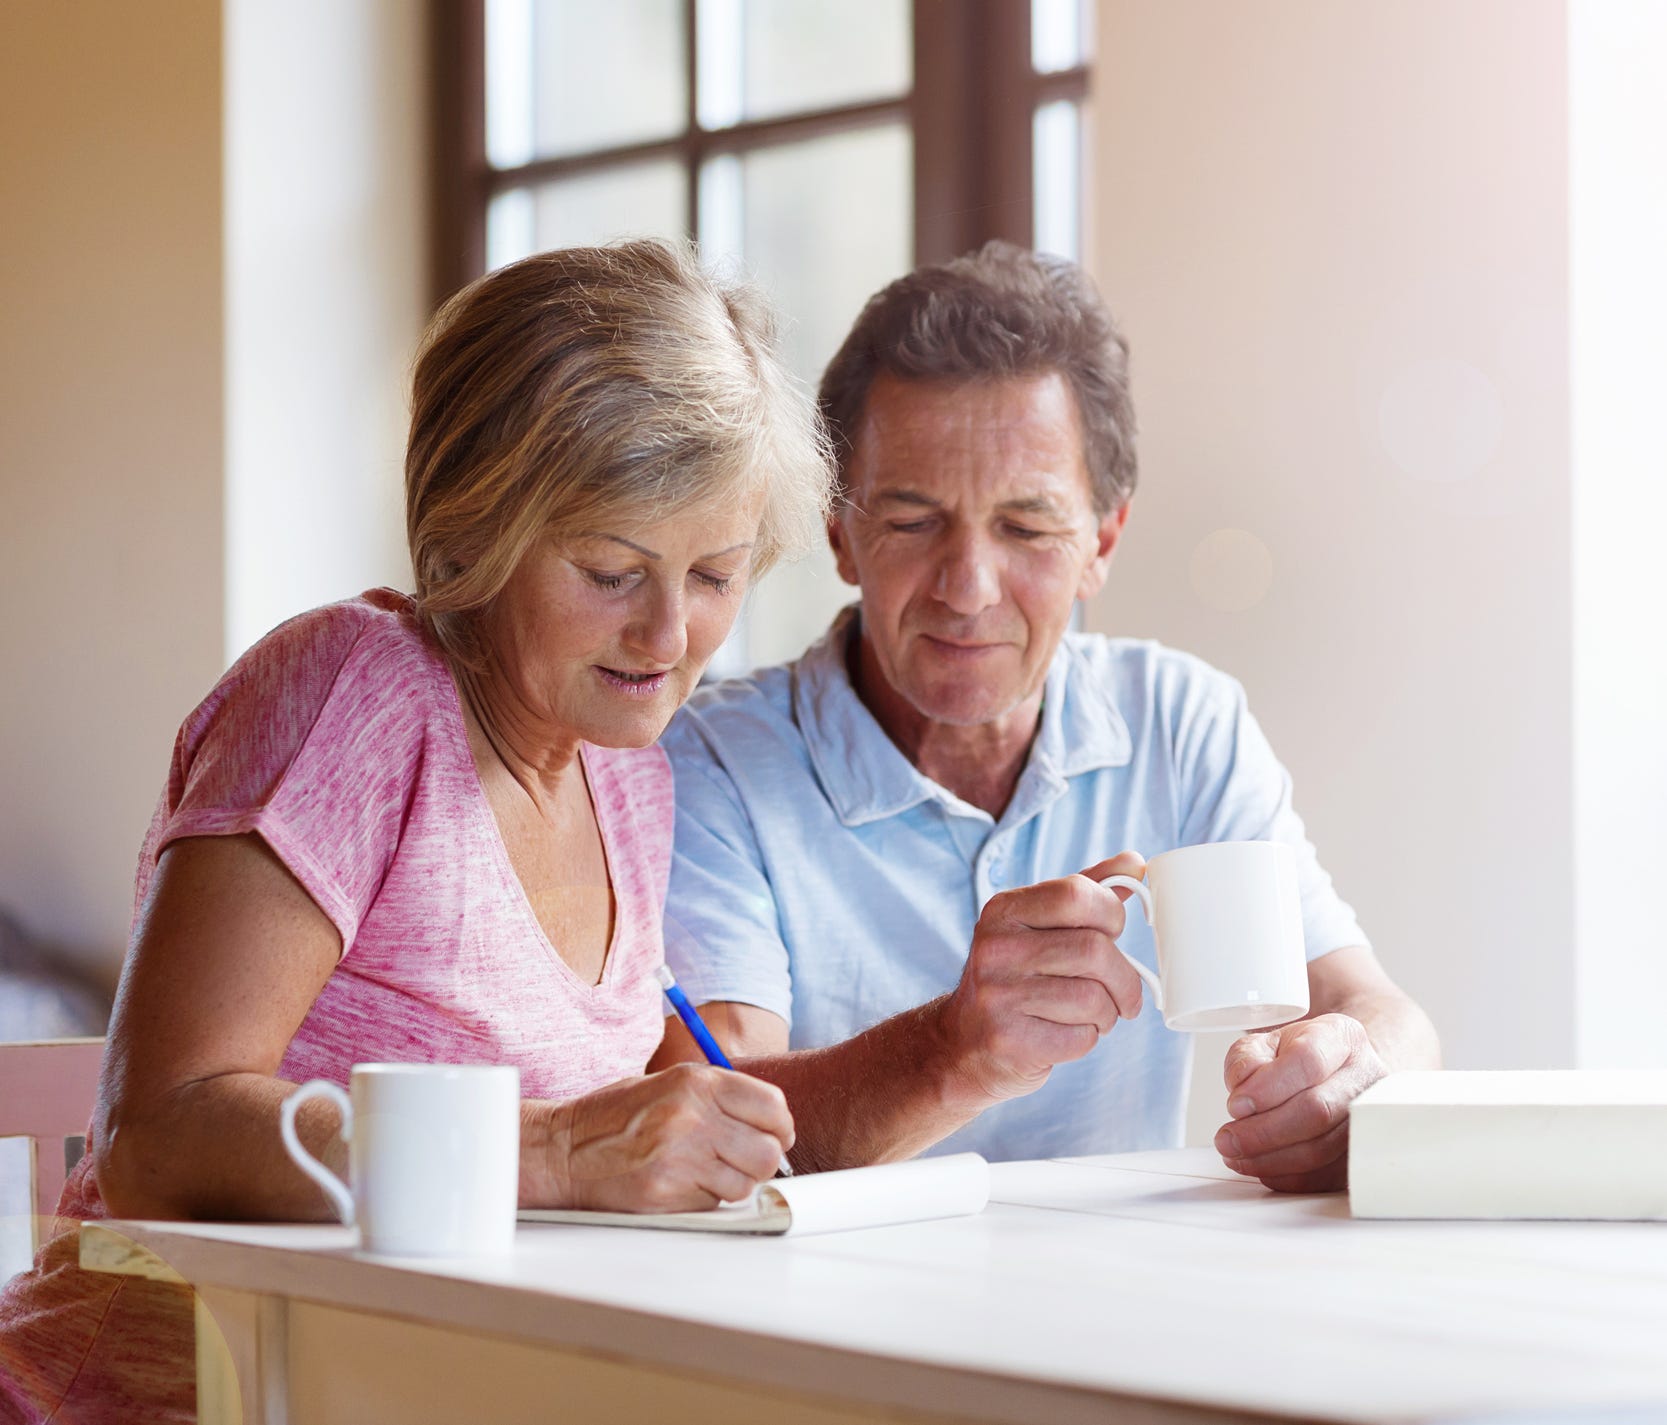 A focus on just the active part of retirement can shortchange your quality of life once you begin to decline, which is why financial advisors suggest you also look at how you'll live in the later phase. Here's what you should consider for that second